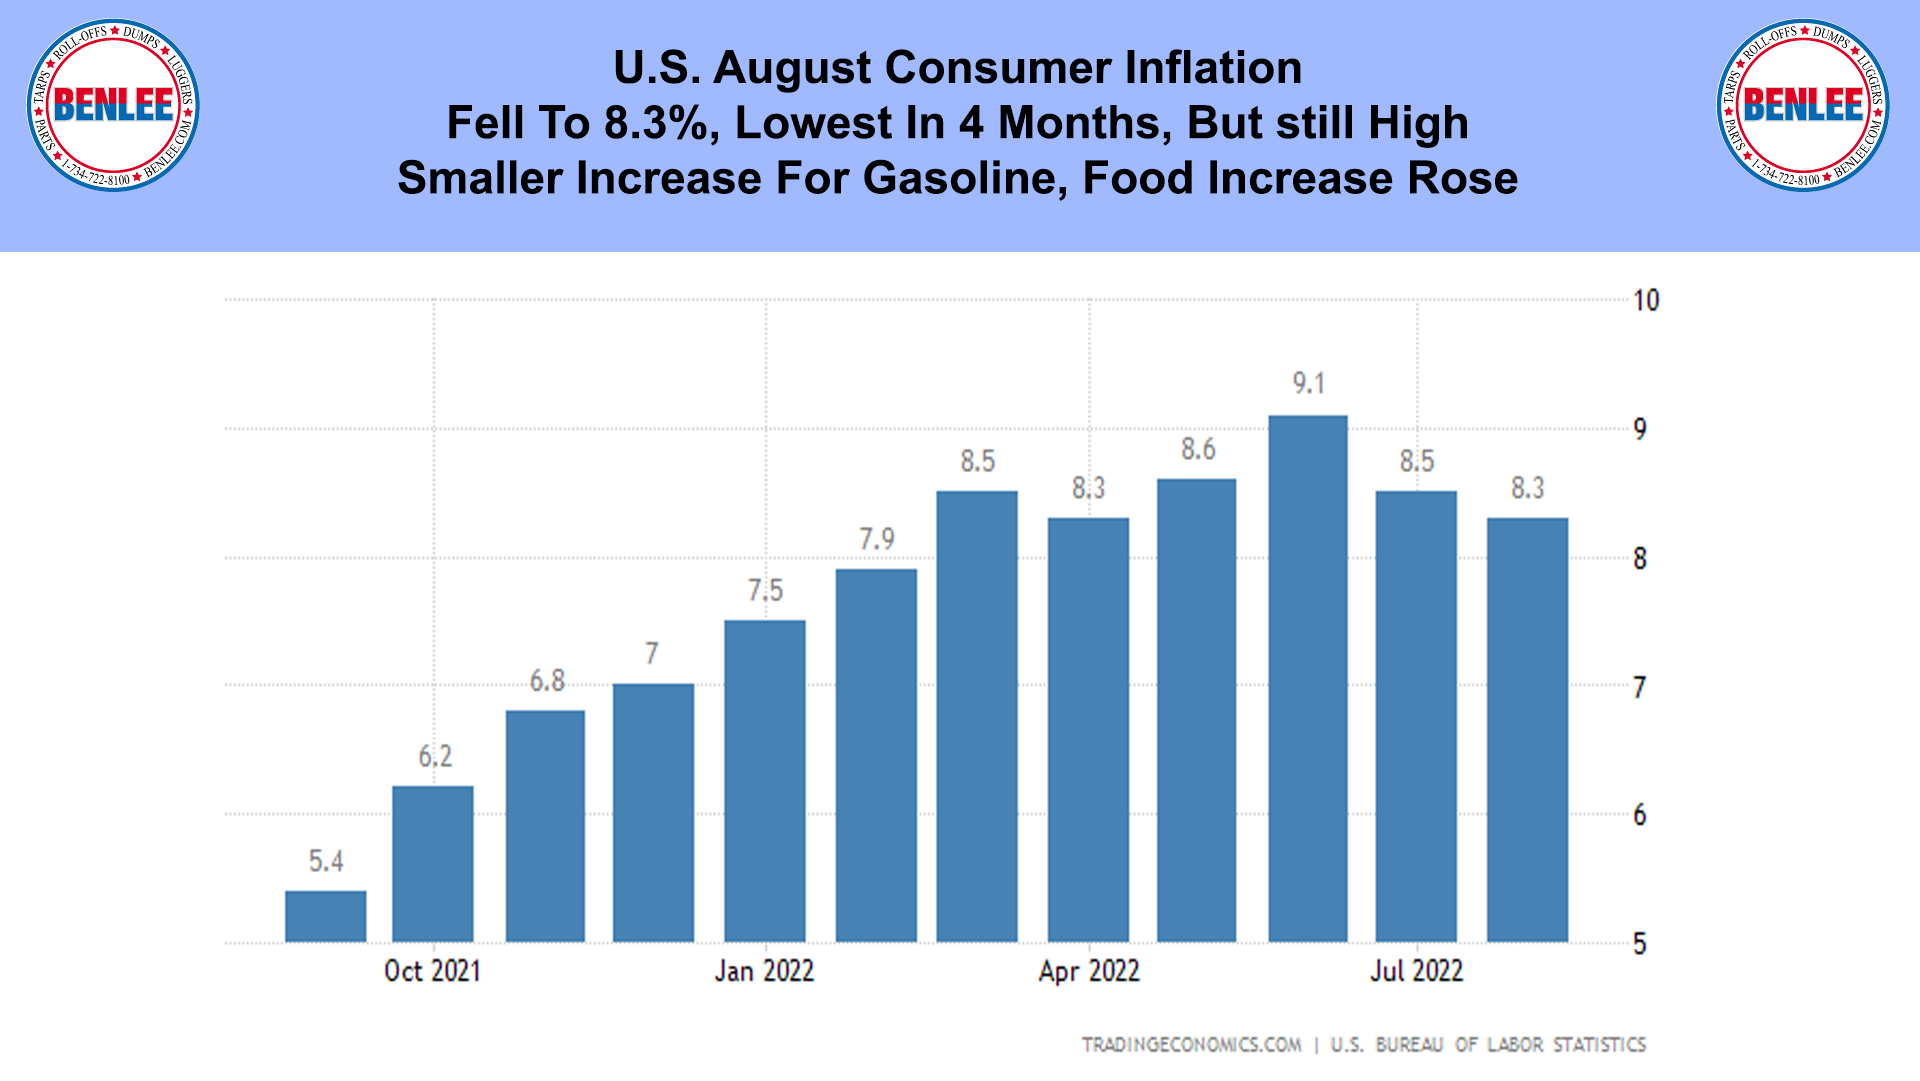 U.S. August Consumer Inflation